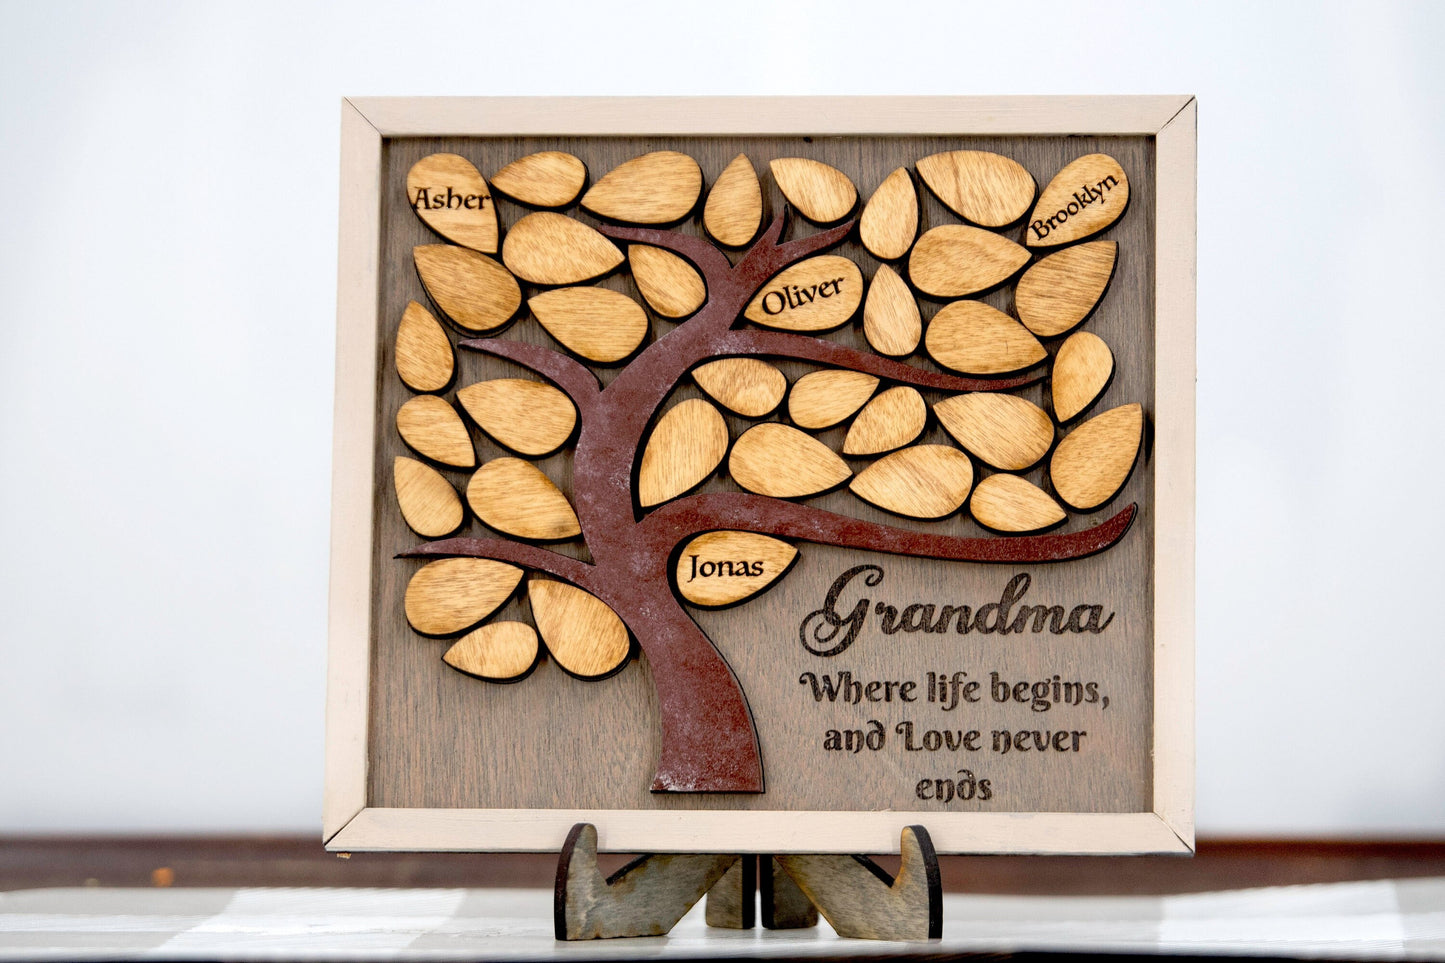 Wooden Family Tree with Frames / Family Tree Wall Art for Living